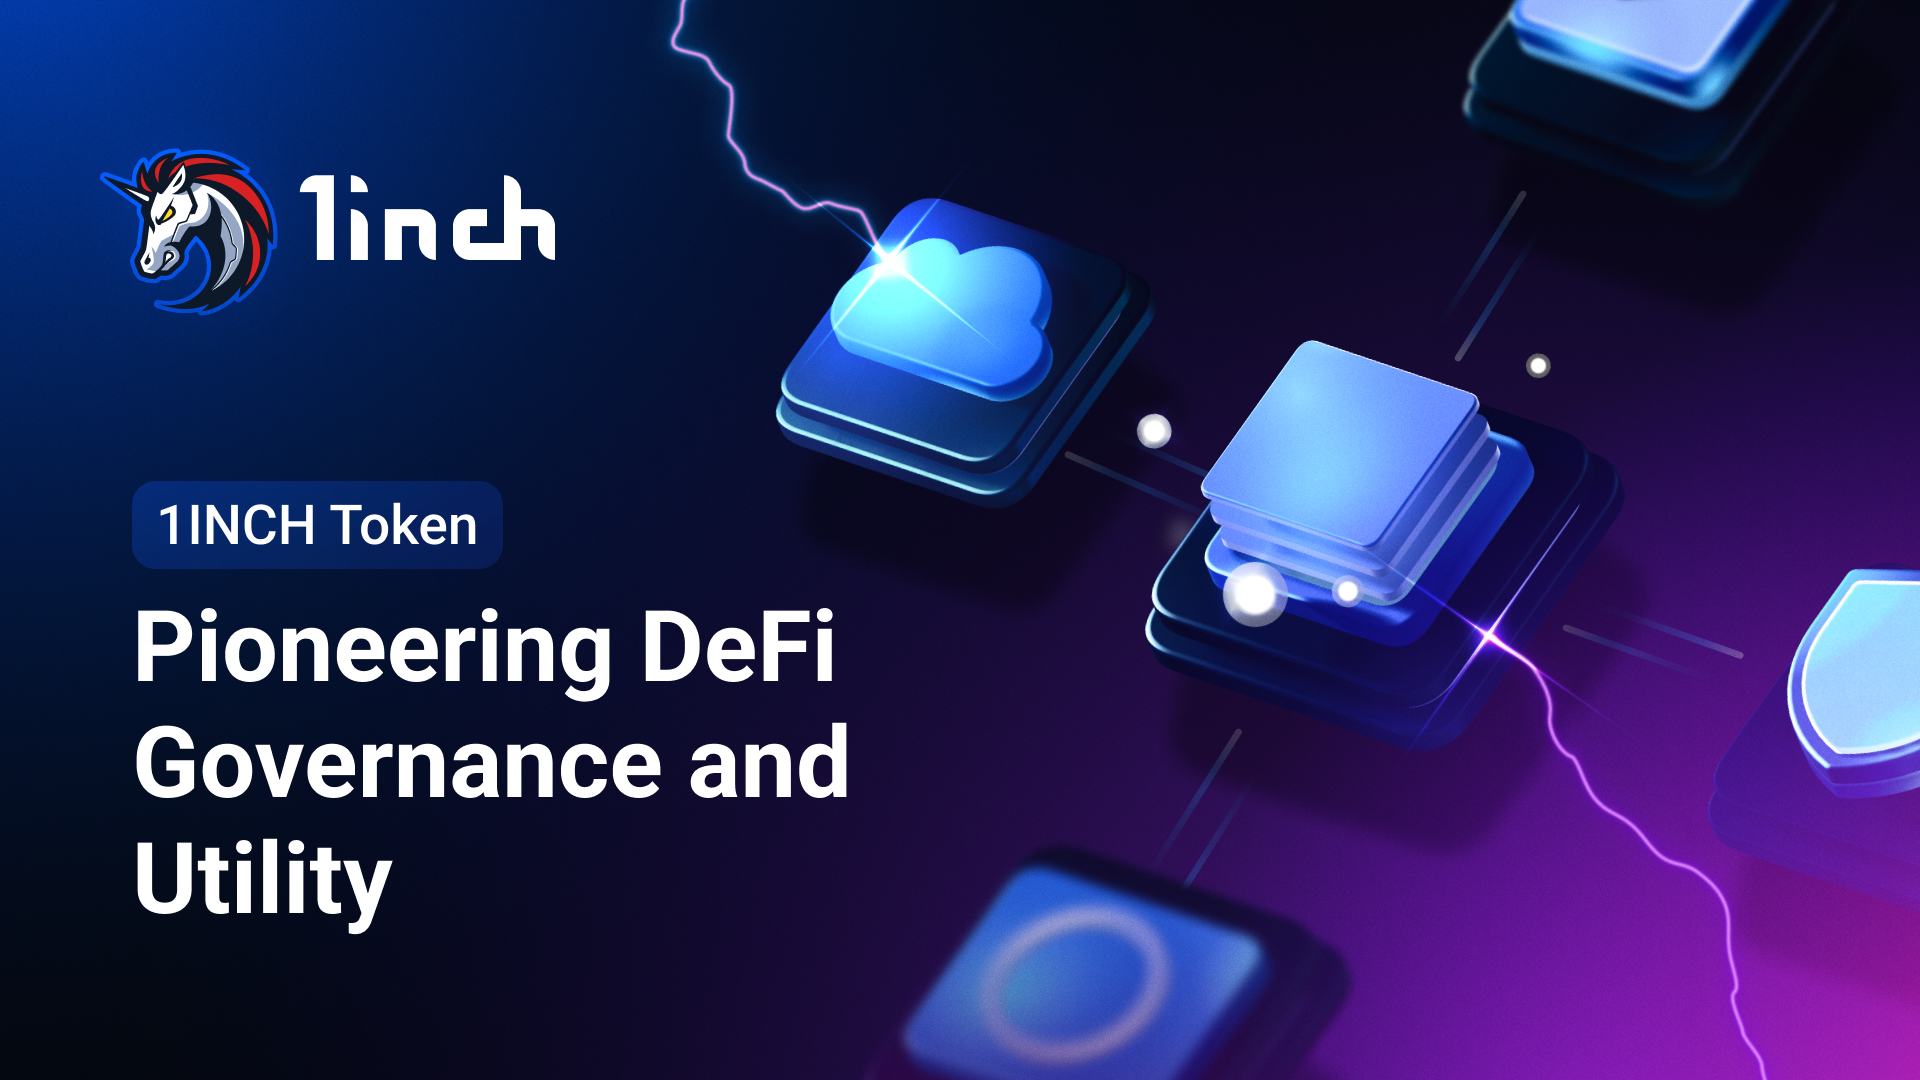 1INCH Token: Pioneering DeFi Governance and Utility